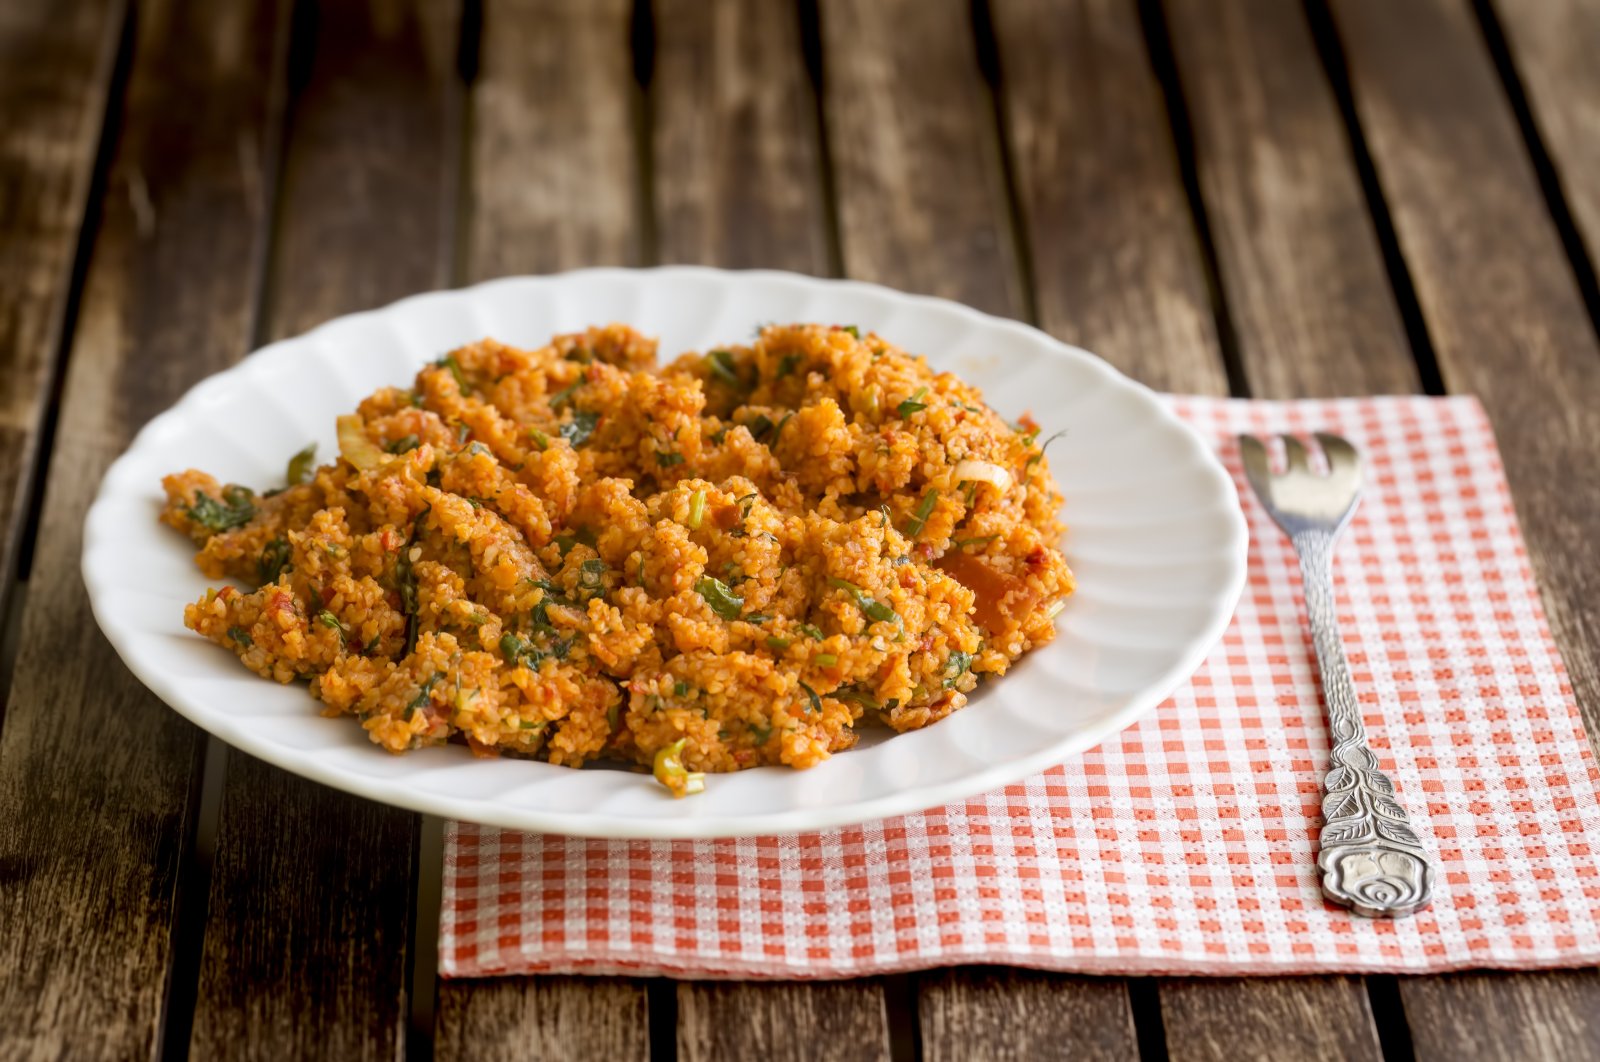 A variety of stews and bean dishes and rice and bulgur on the side are popular dishes in Türkiye. (Shutterstock Photo)